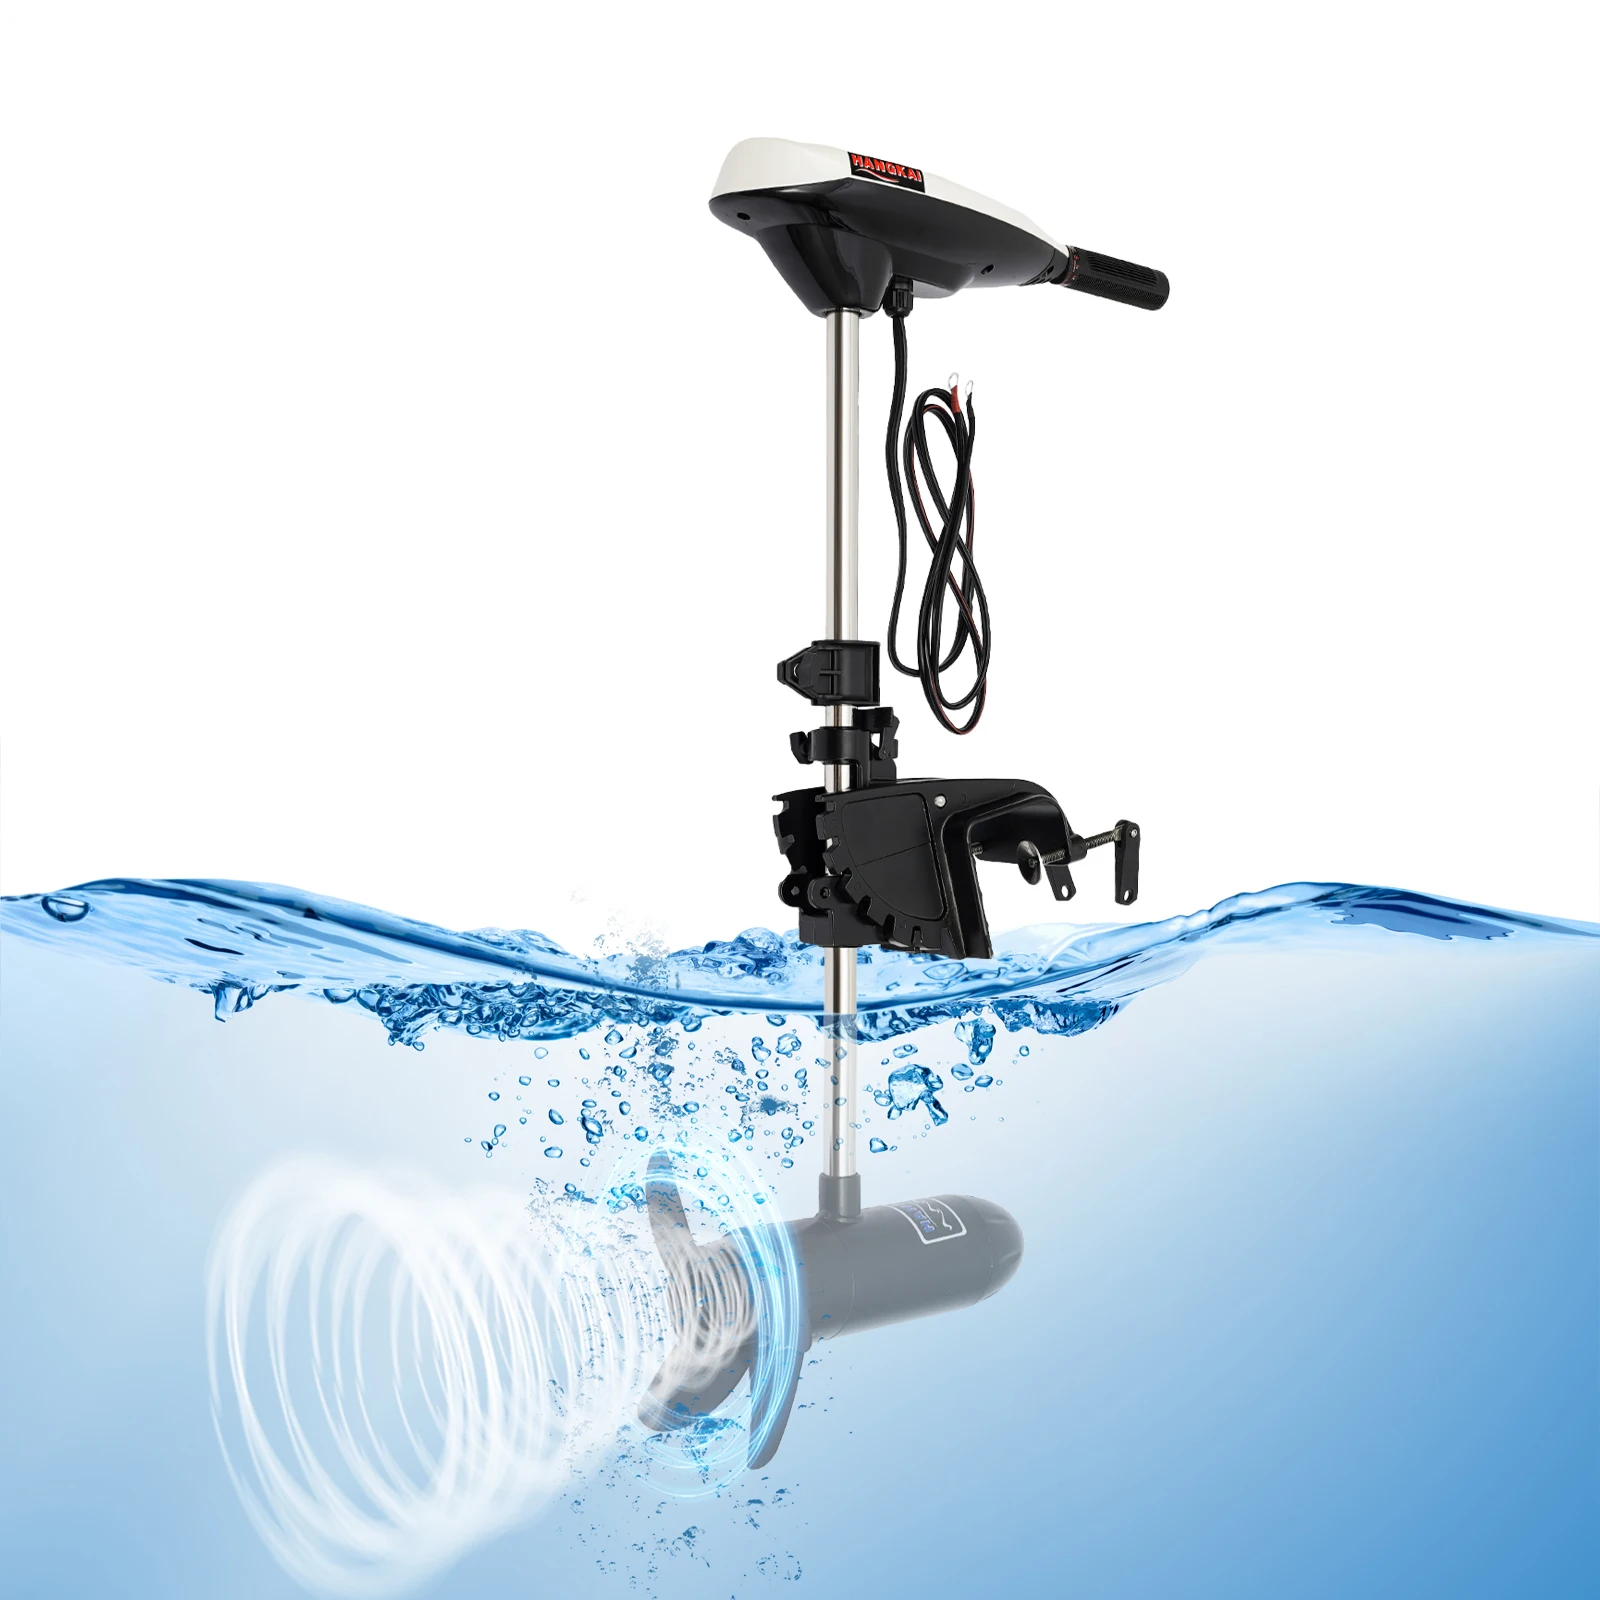 

65lbs 12V Heavy Duty Electric Trolling Motor Engine Outboard motor Fishing Boat With 40CM Short Shaft Brush Motor Suitable